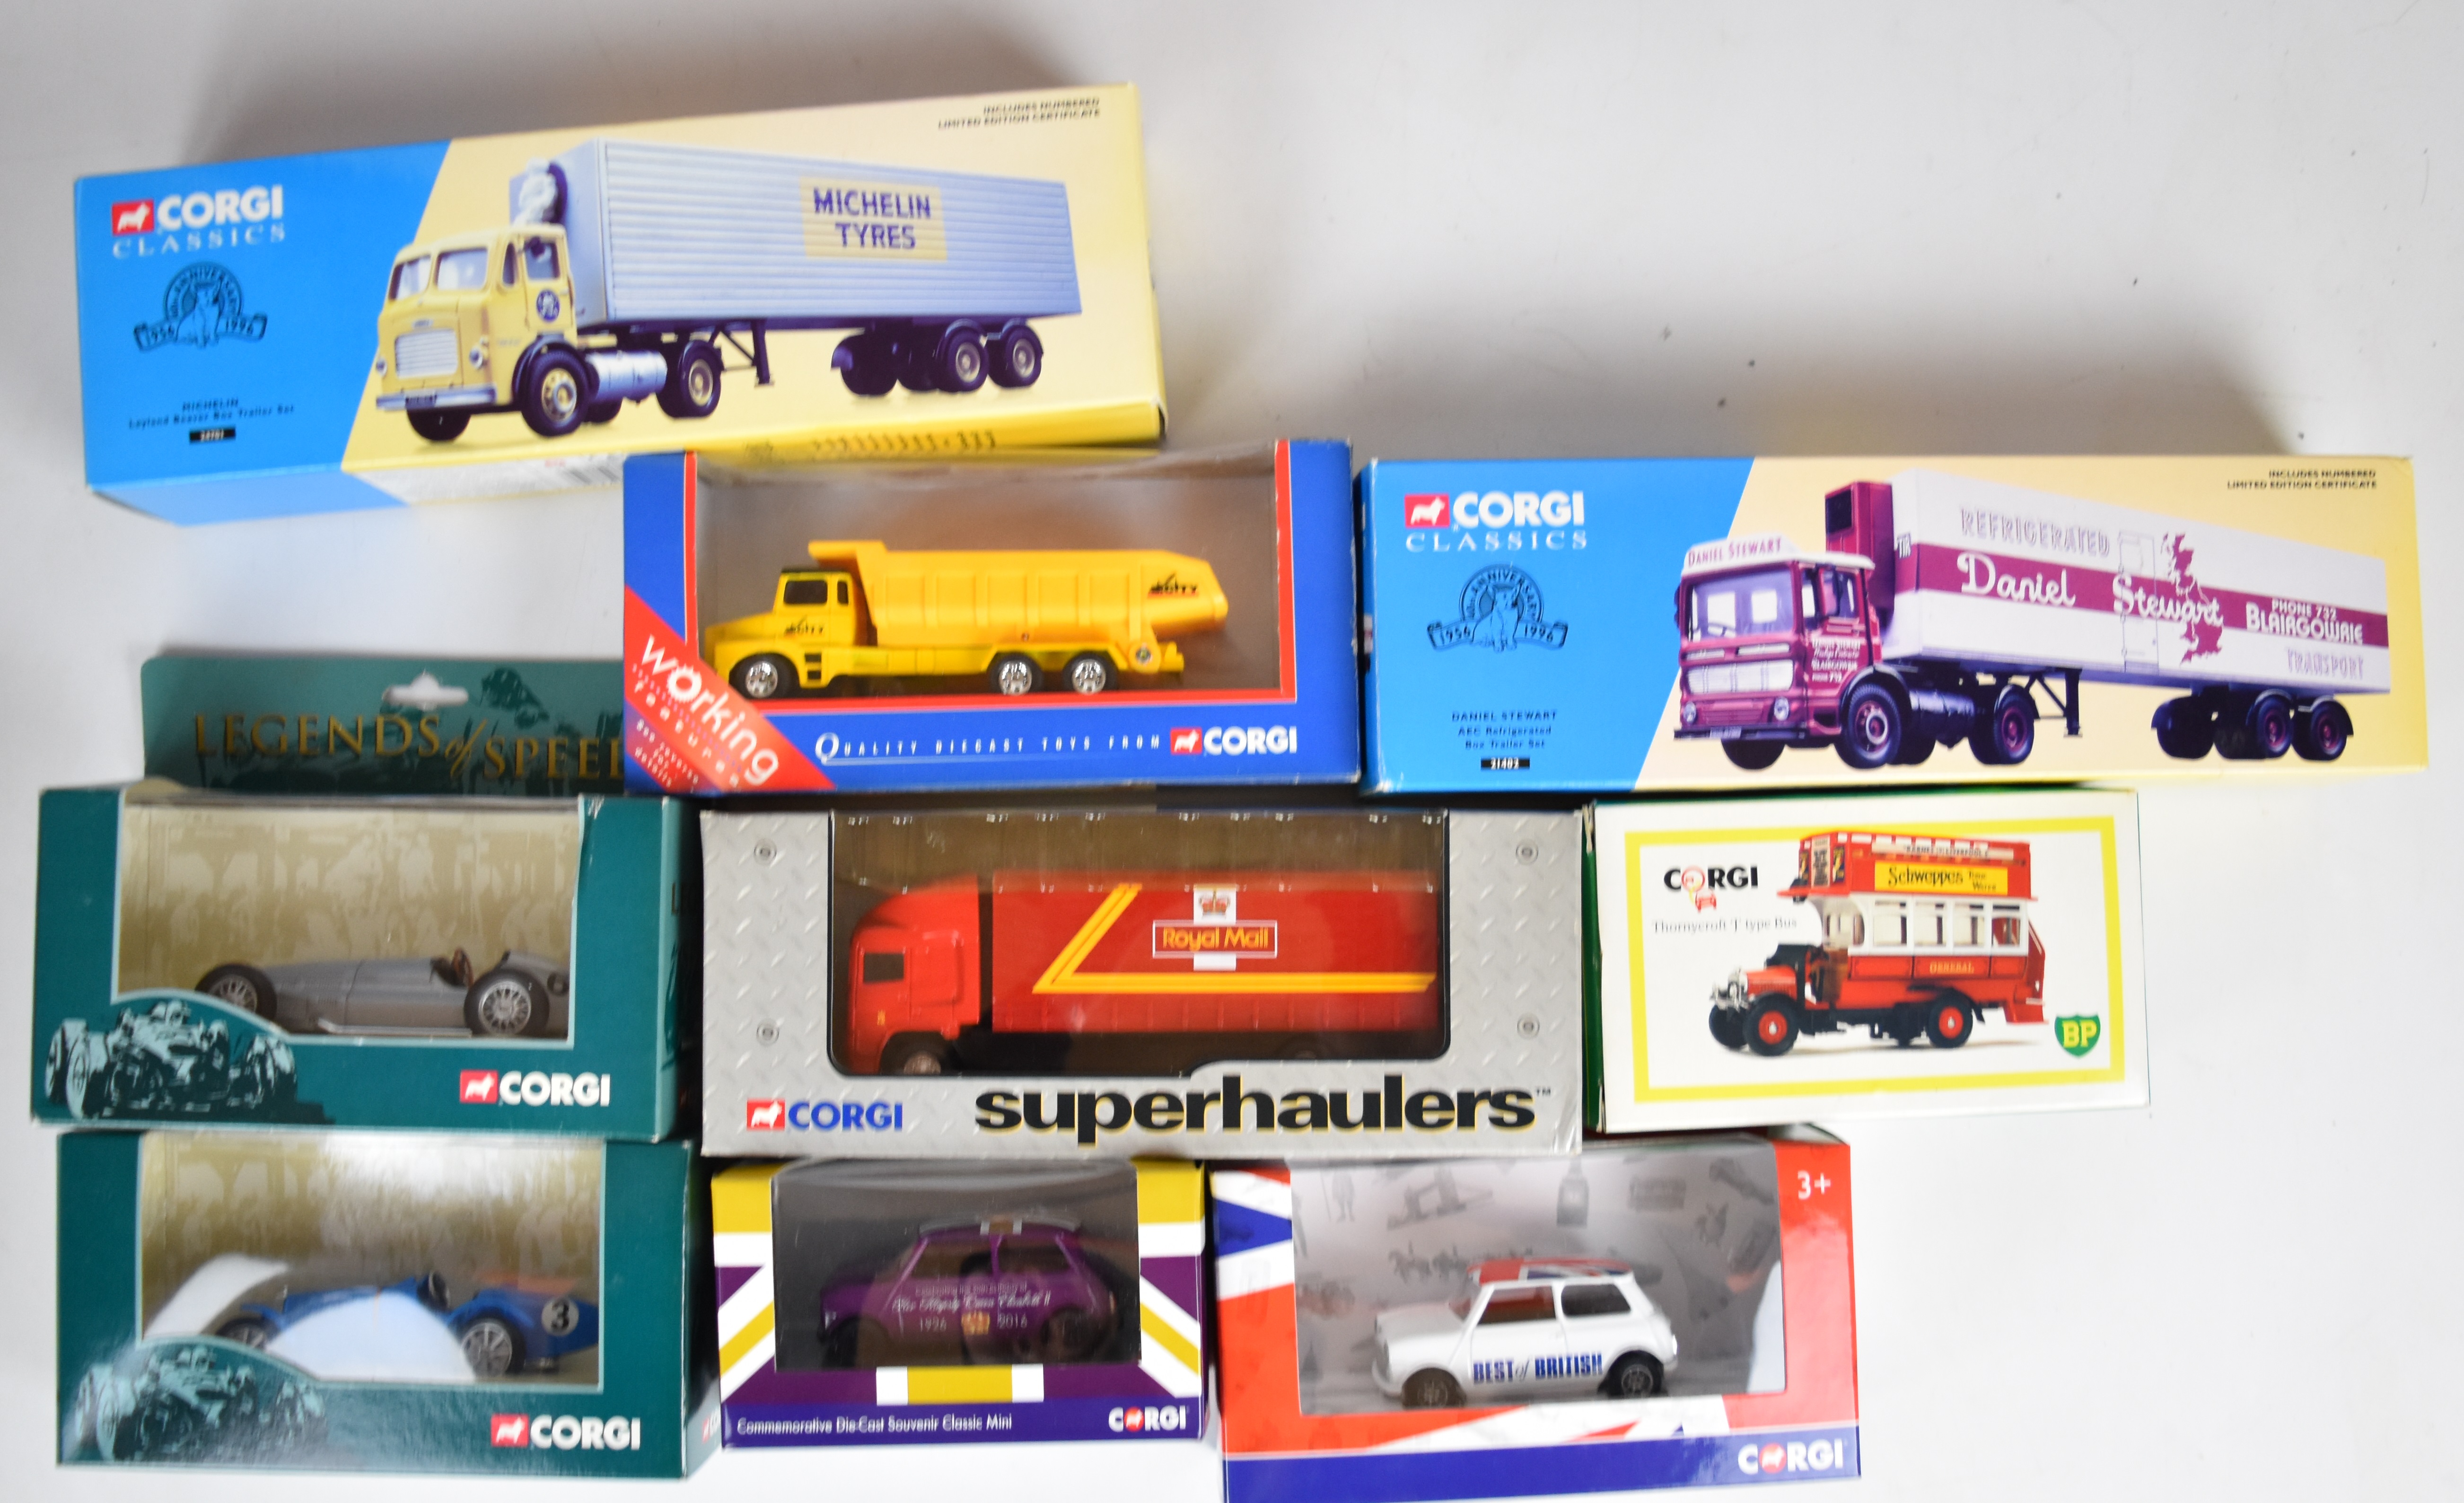 Over thirty Corgi diecast model cars and haulage vehicles, series to include Superhaulers, - Image 3 of 6